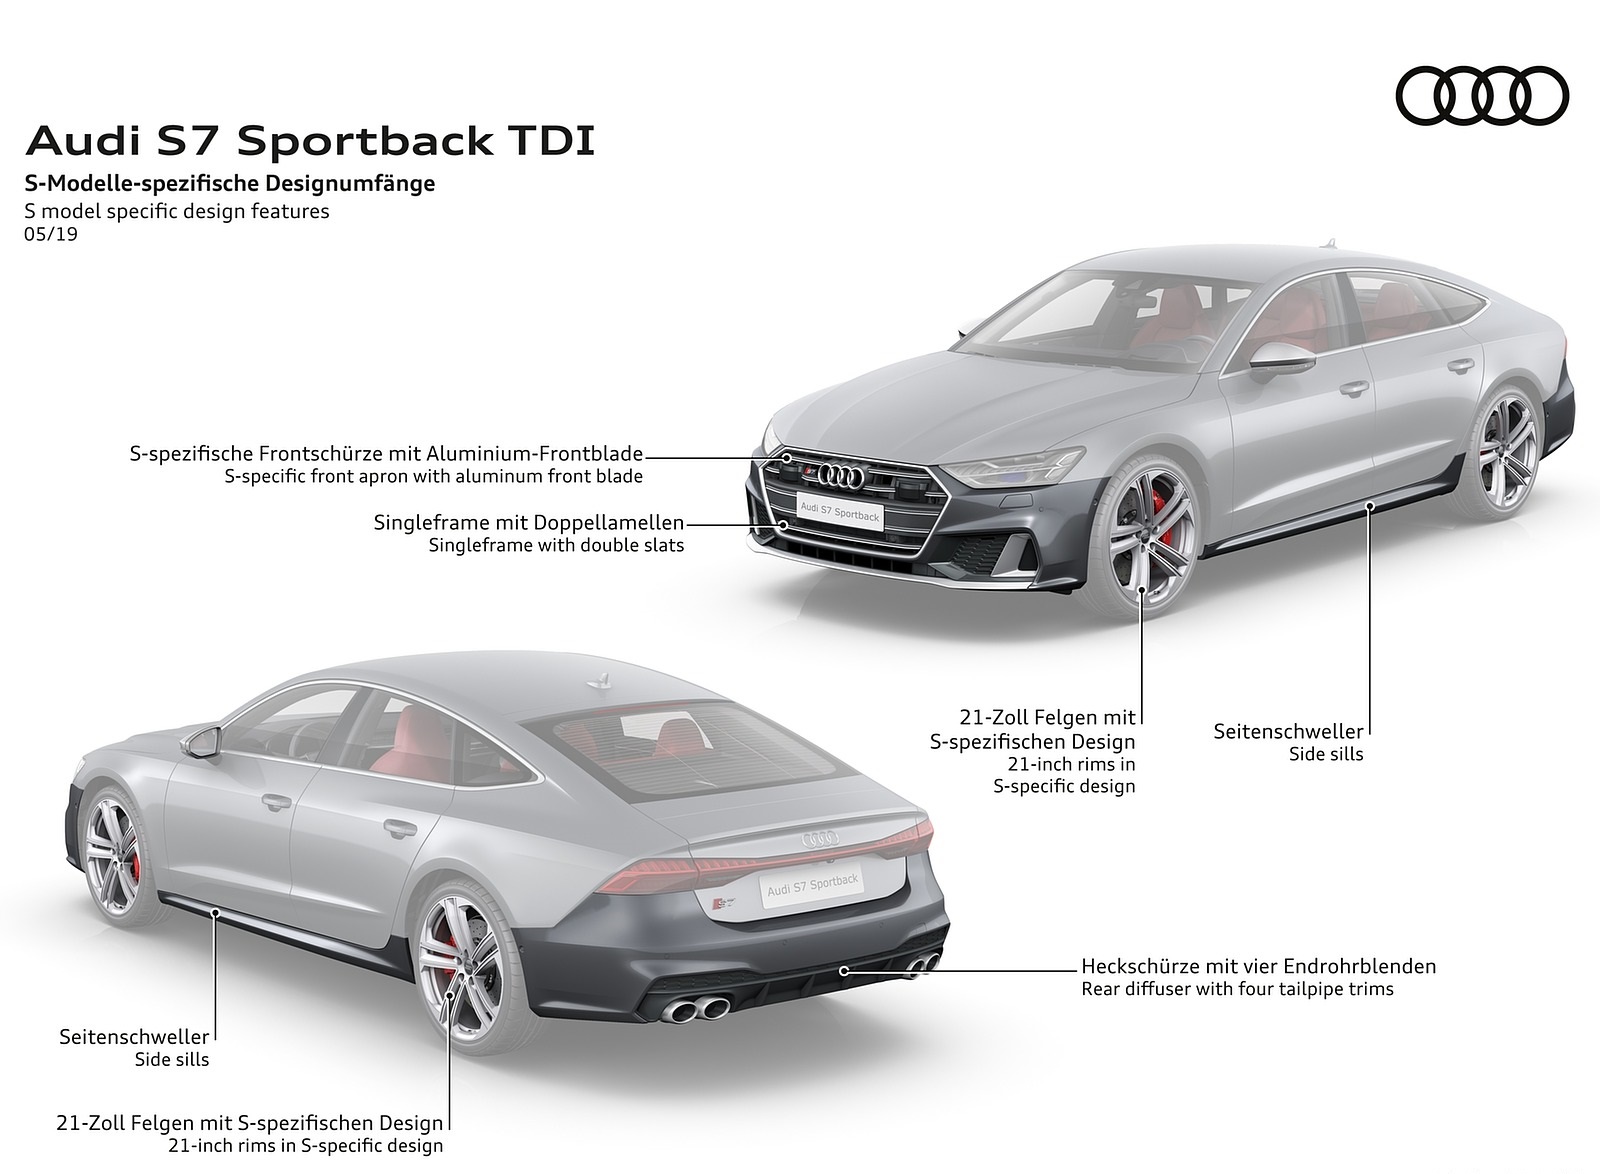 2020 Audi S7 Sportback TDI Design Features Wallpapers #87 of 88